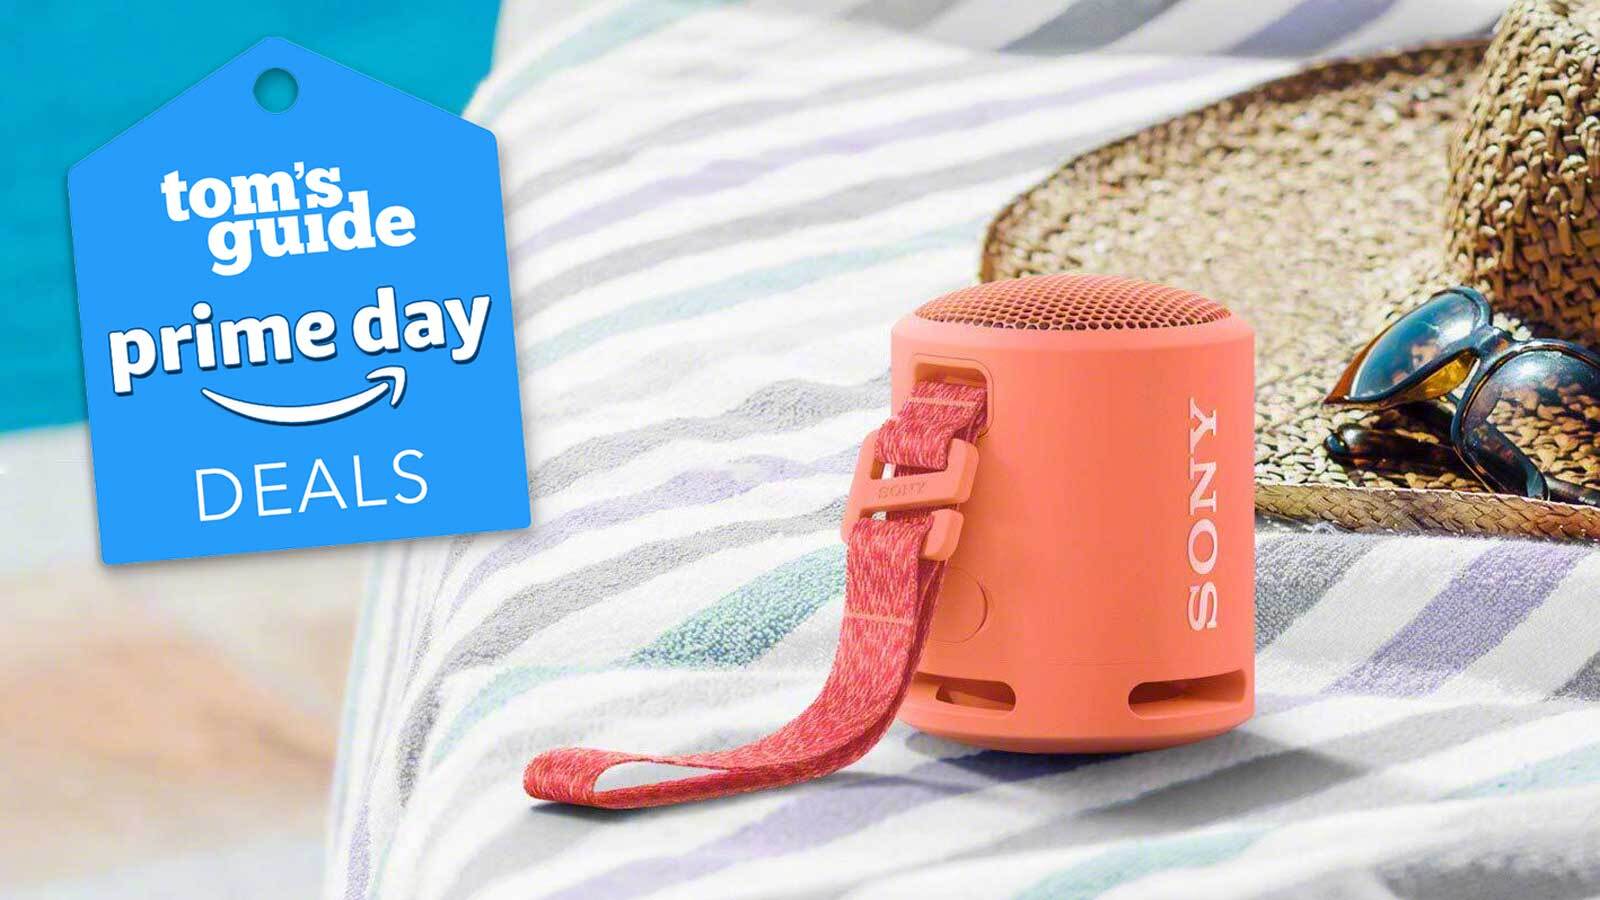 Image of Sony Bluetooth Portable Speaker with Prime Day tag